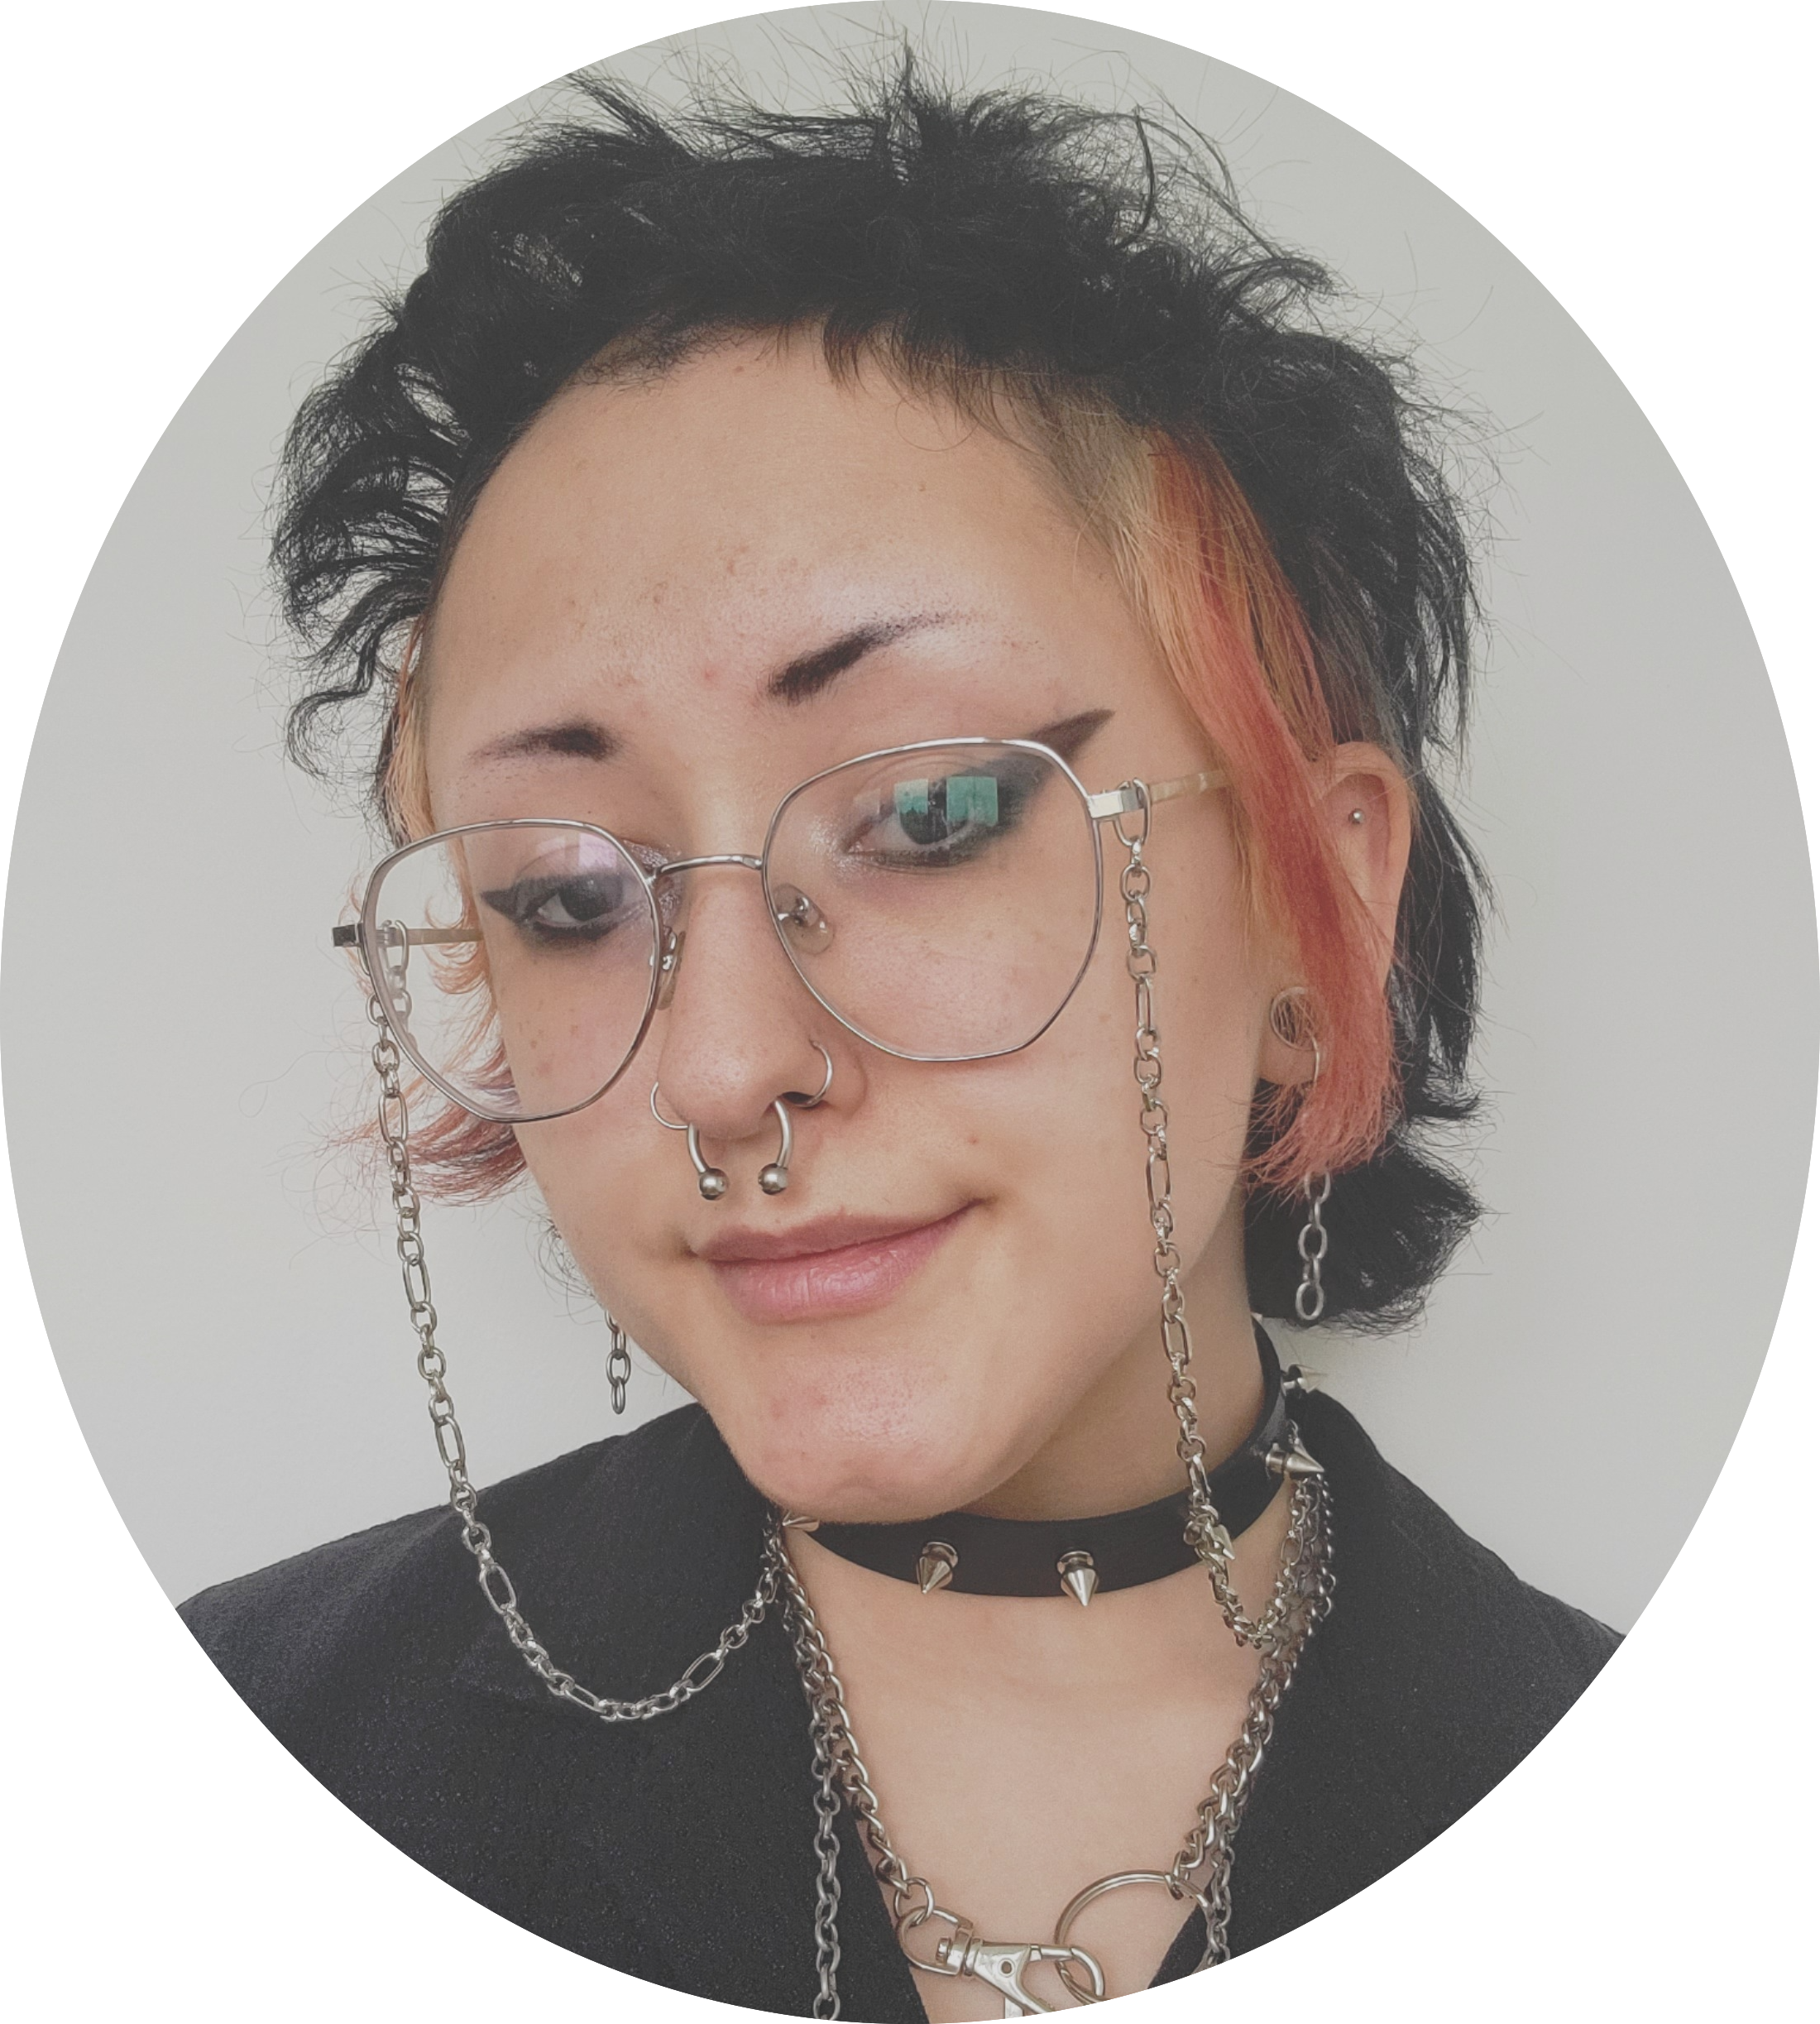 Kaymiss is an androgynous presenting person with winged eye makeup, a nose ring and septum piercing, gauged ears, and short-cropped, fluffy black and pink hair. They are wearing wire rimmed glasses with a chain, a spiked dog collar, a clipped chain necklace and a black shirt.